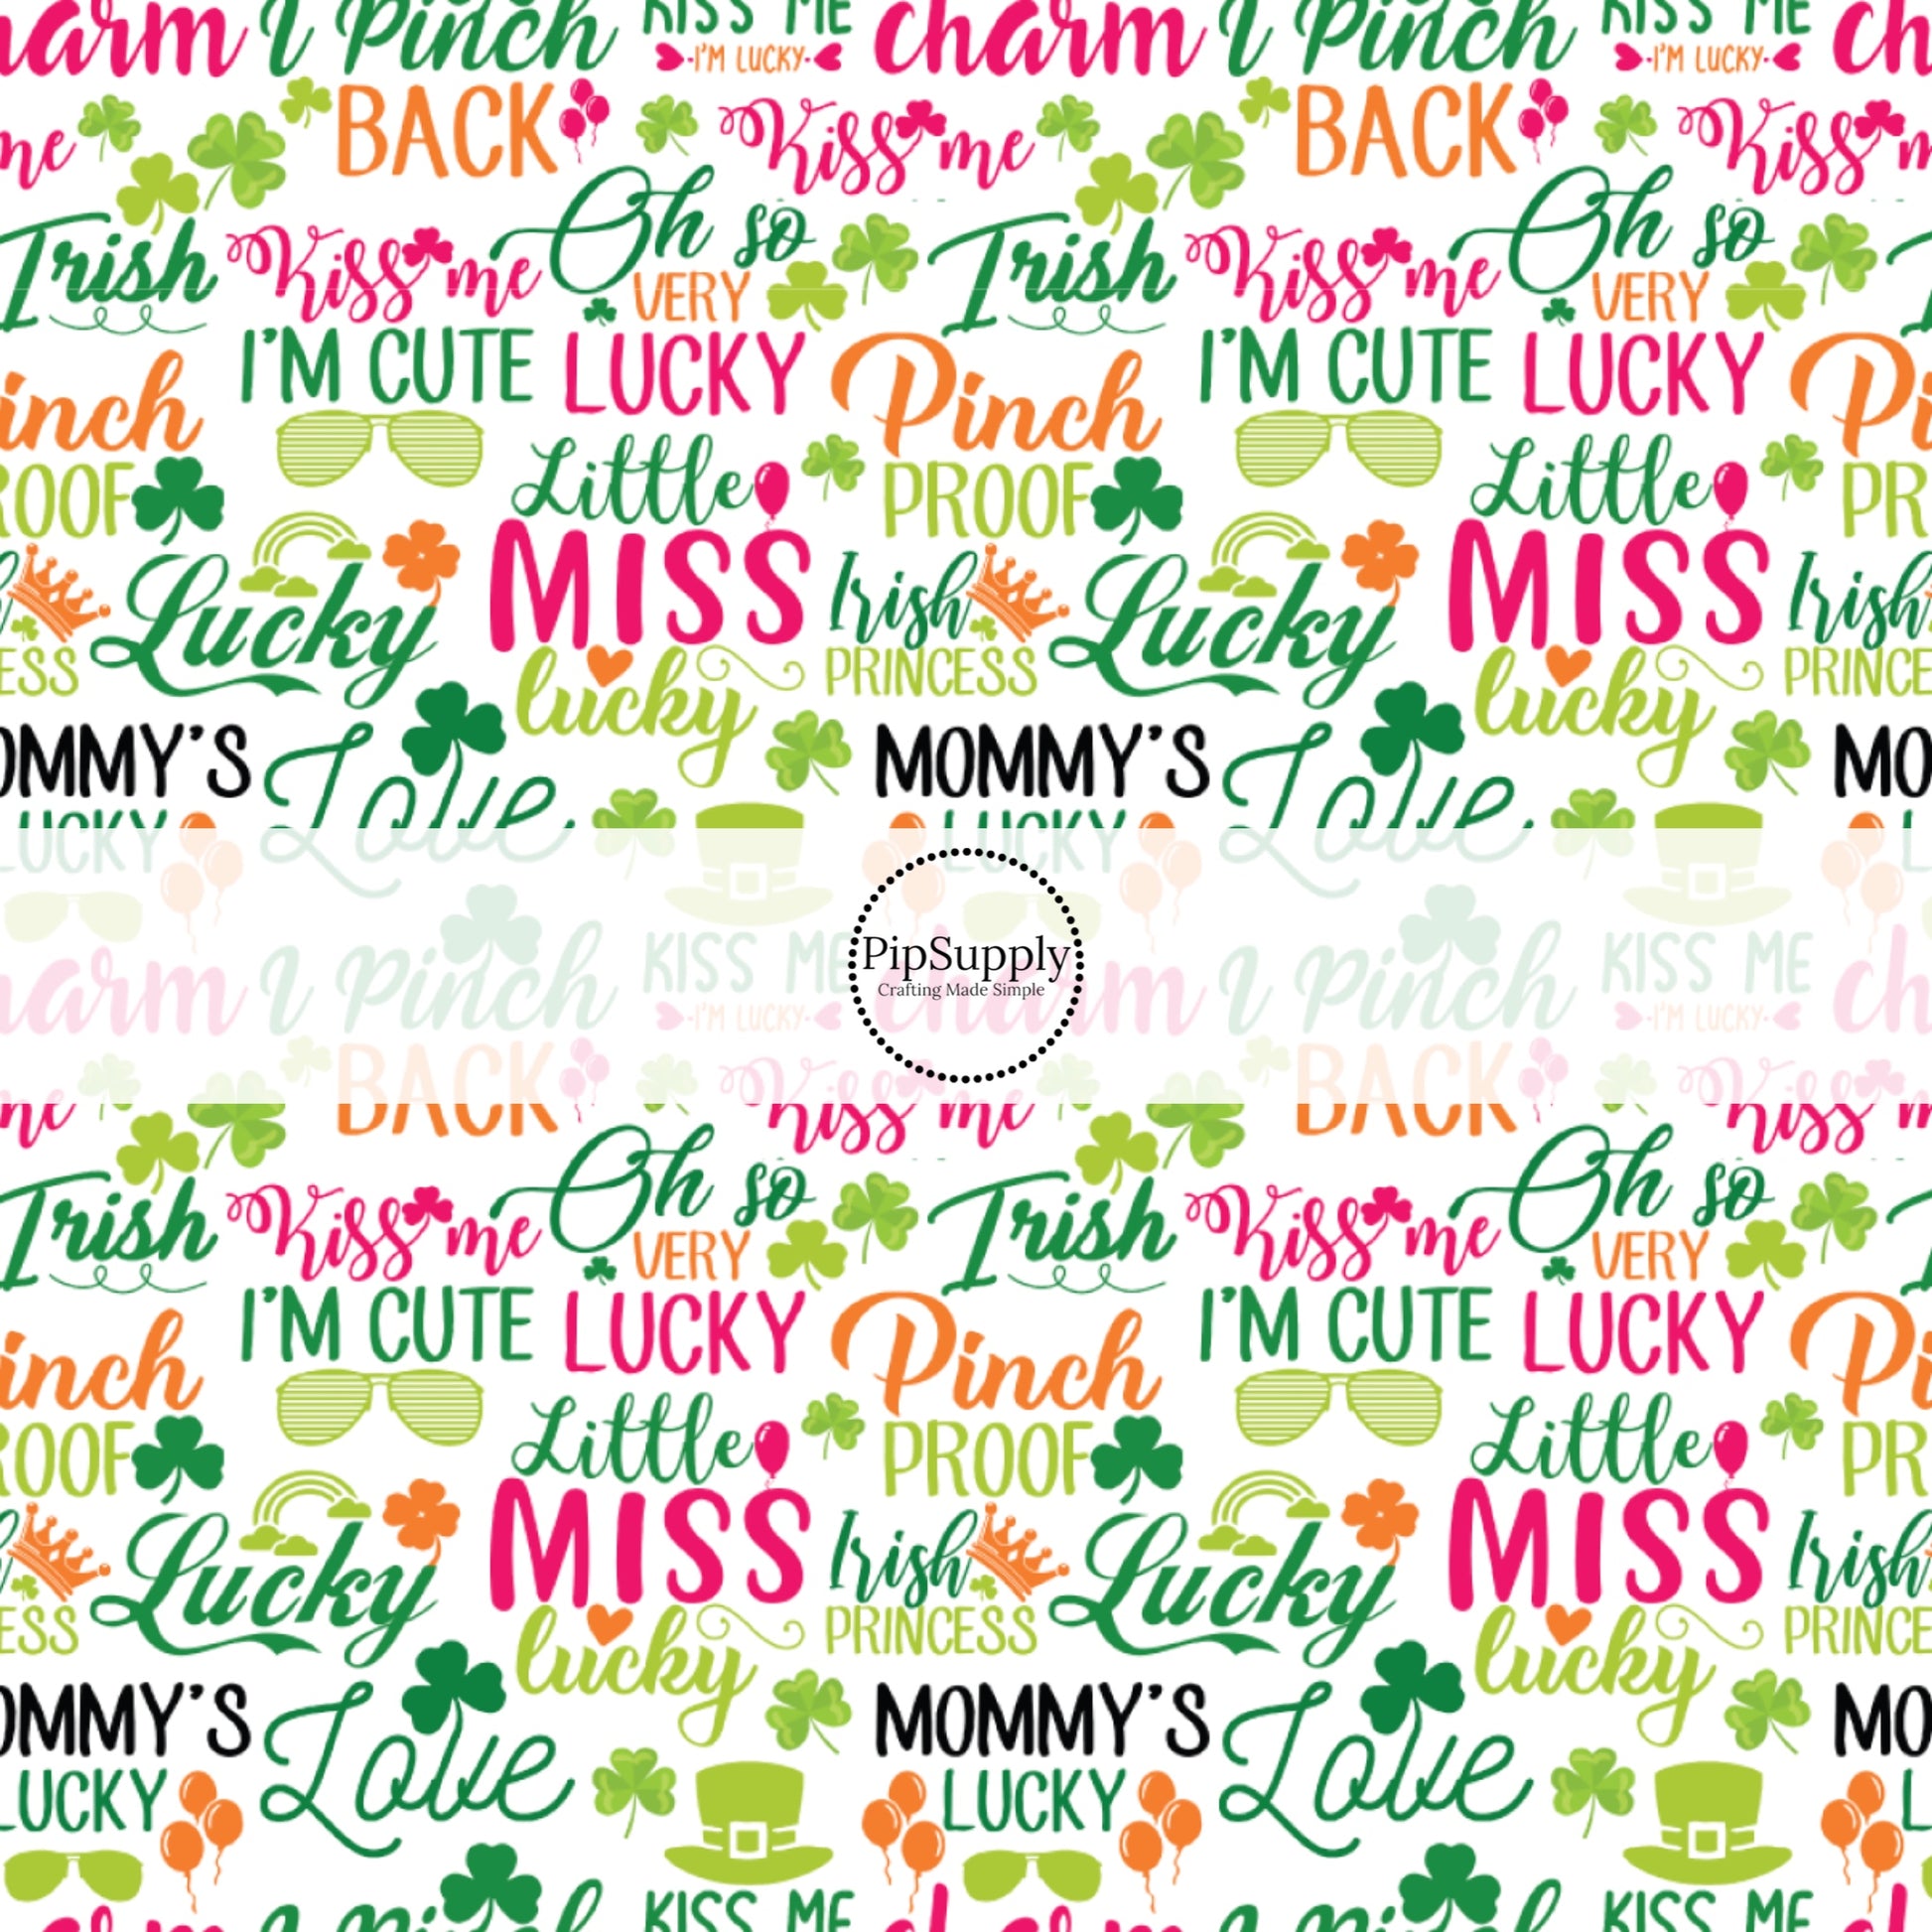 "Pinch Proof, Mommys lucky charm, little miss lucky, and irish princess" words in pink, green, and orange on a white bow strip